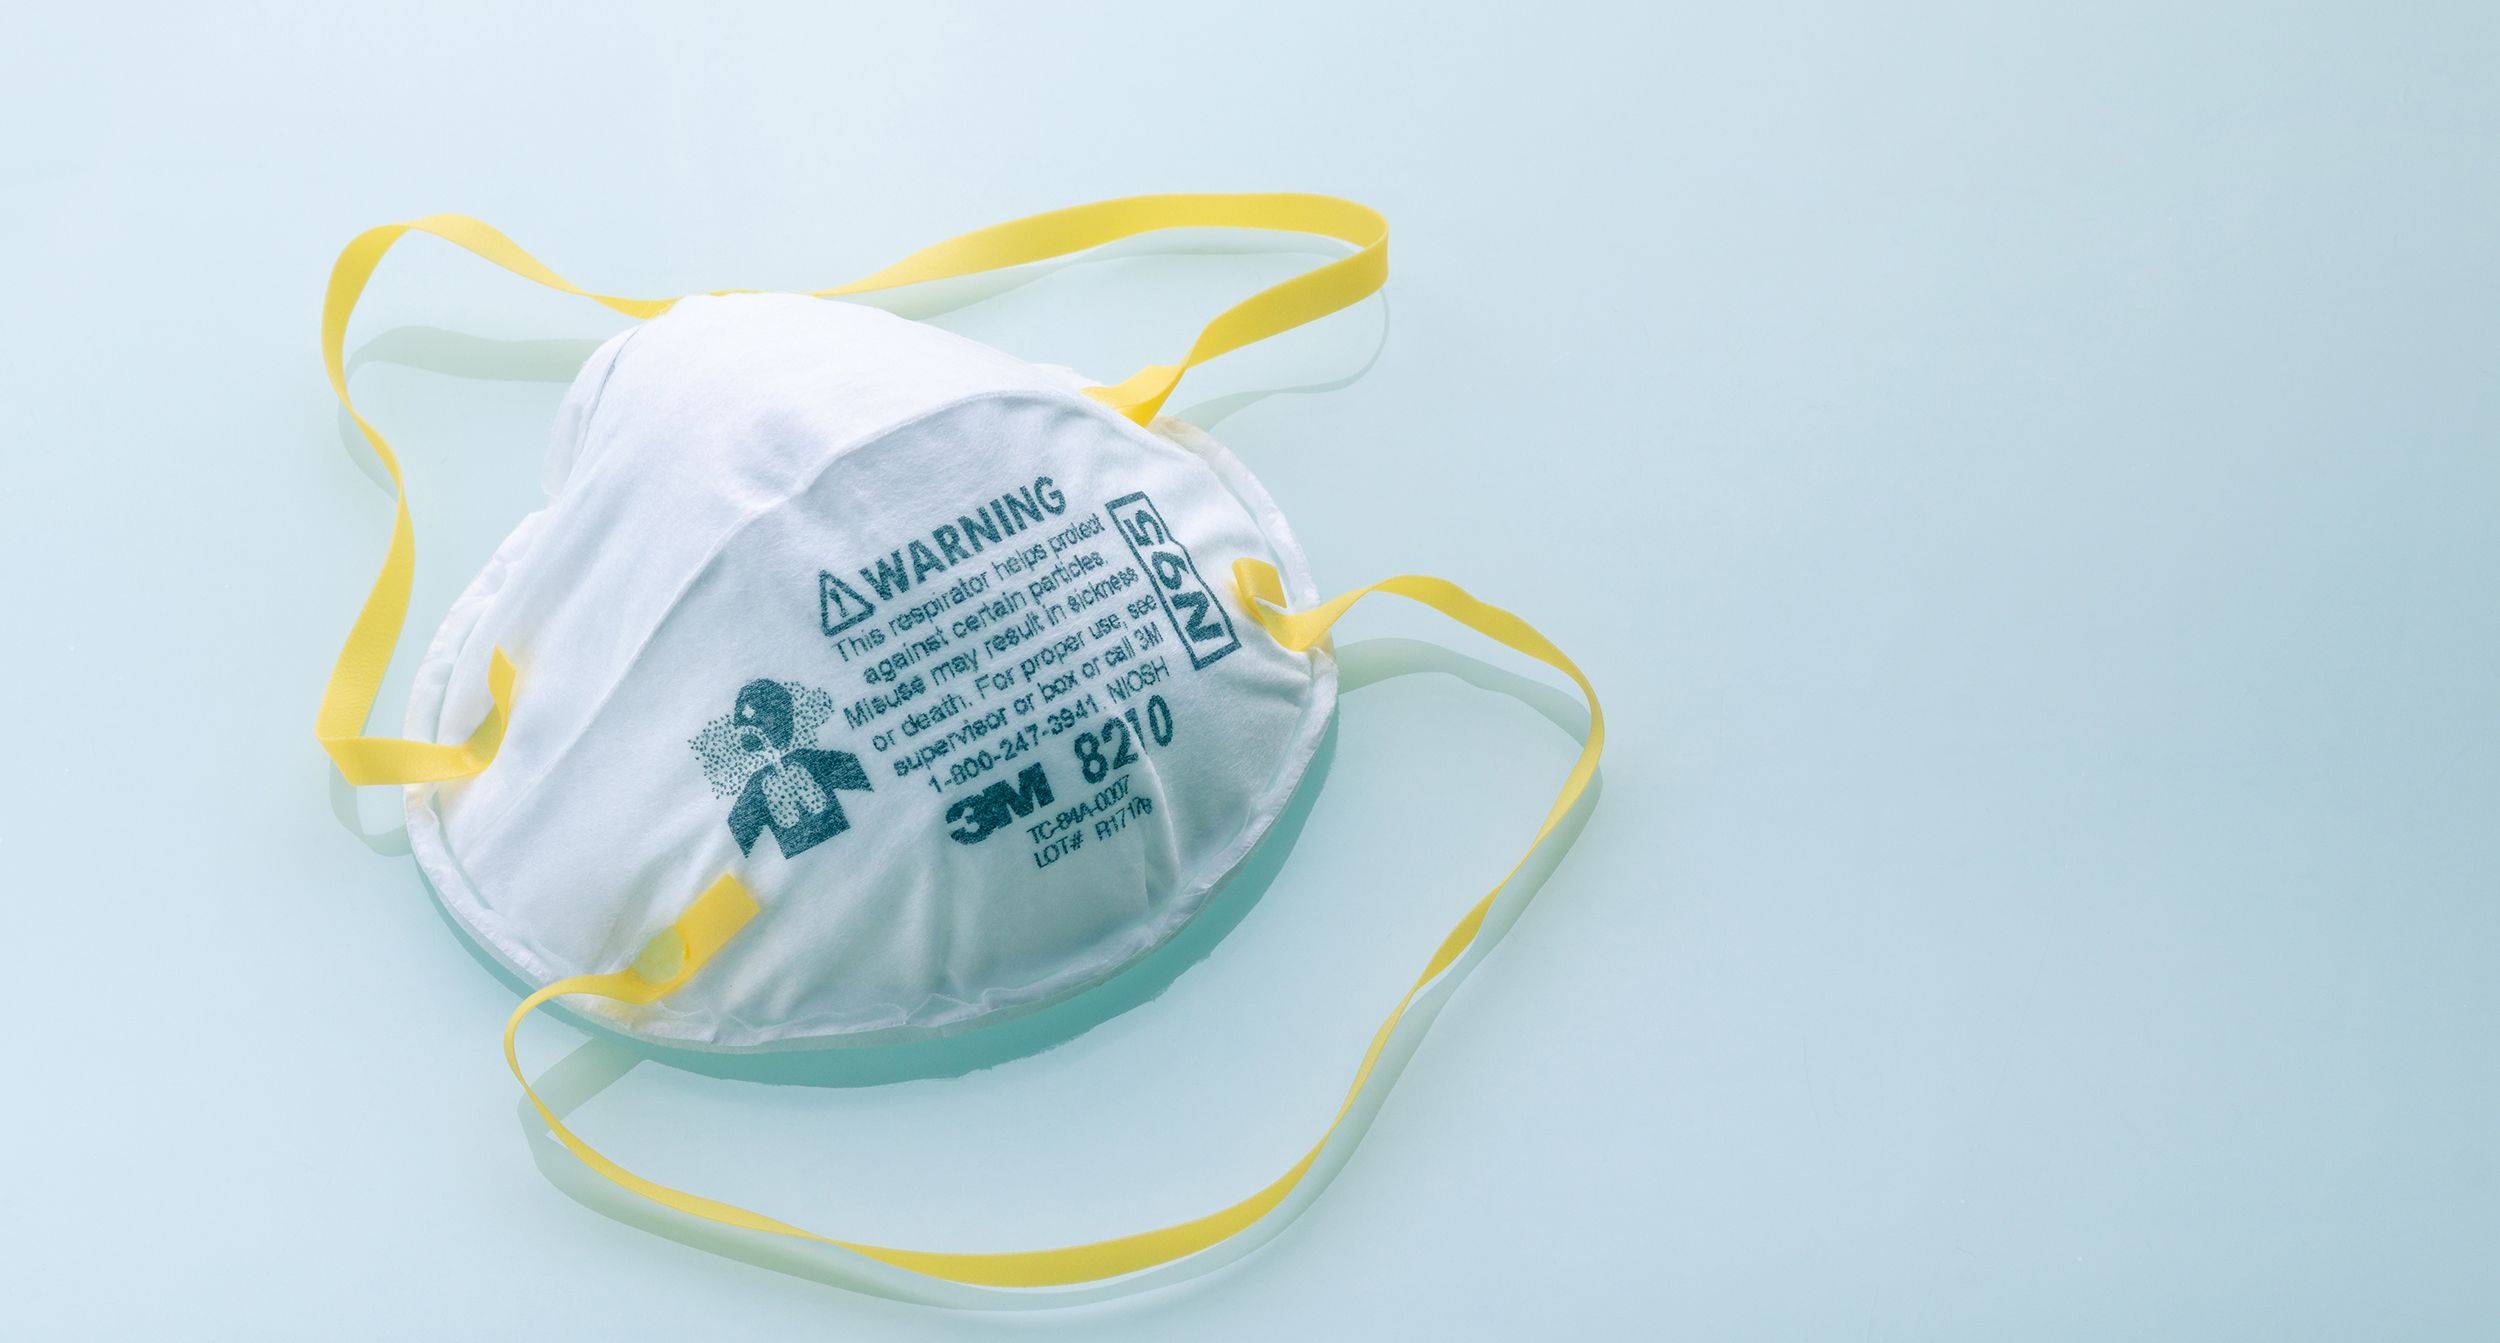 N95 mask or N95 respirator of 3M brand for industrial use, helps protect against particles, also can be used during the public health emergency of the COVID-19 pandemic situation